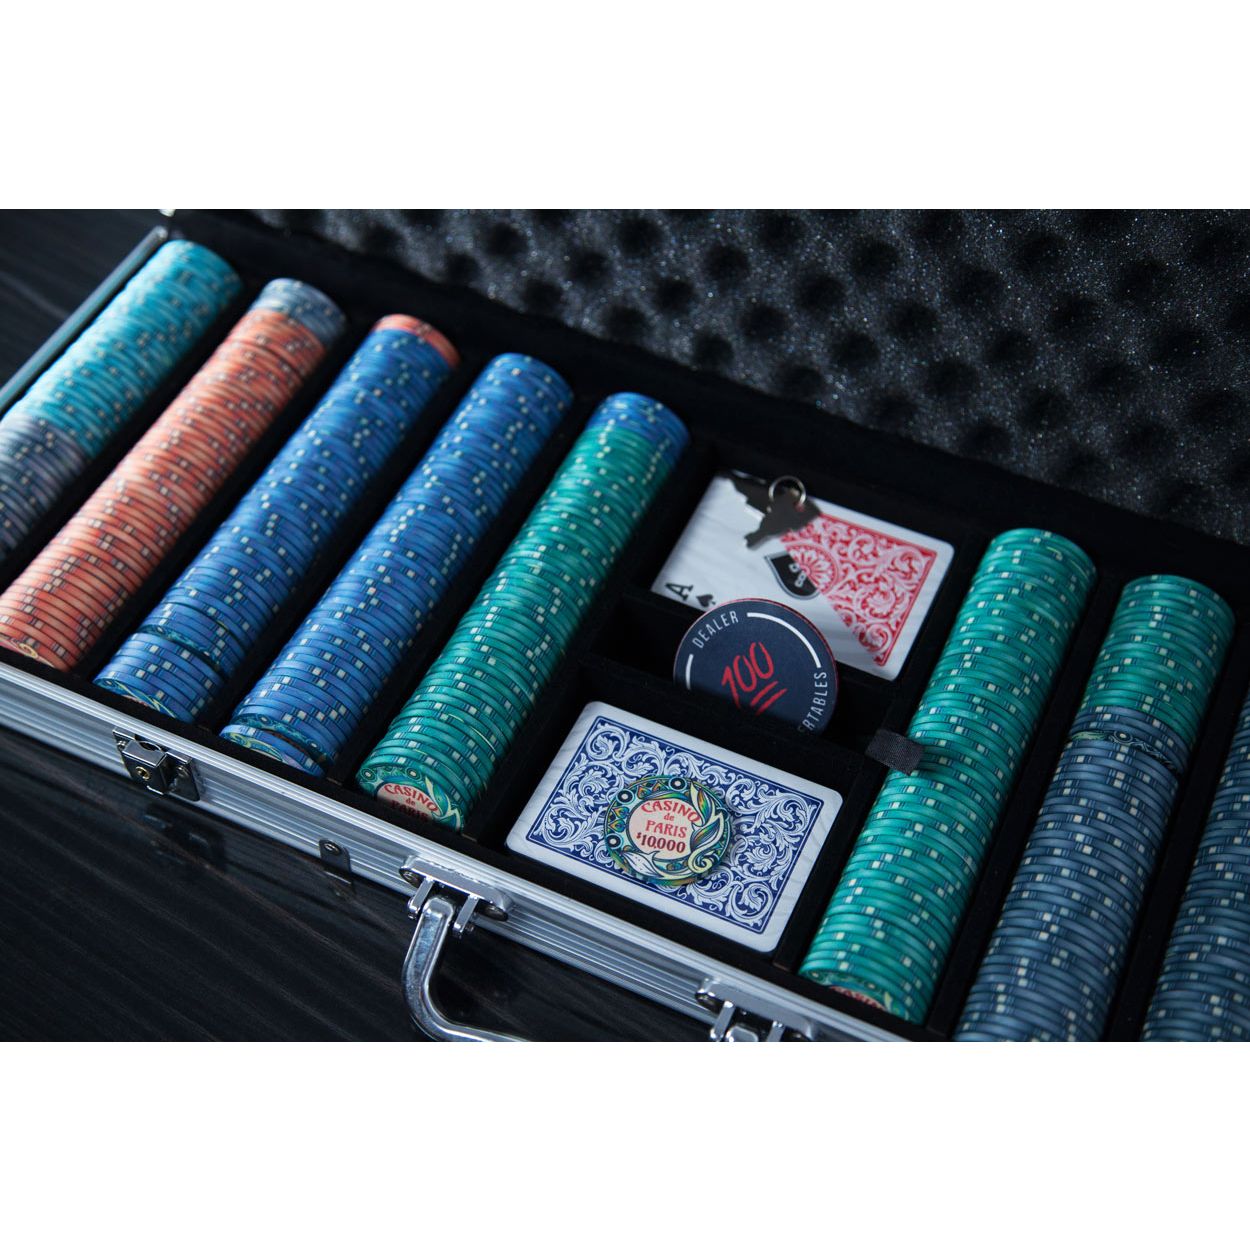 Poker Chips & Accessories by BBO Poker Tables